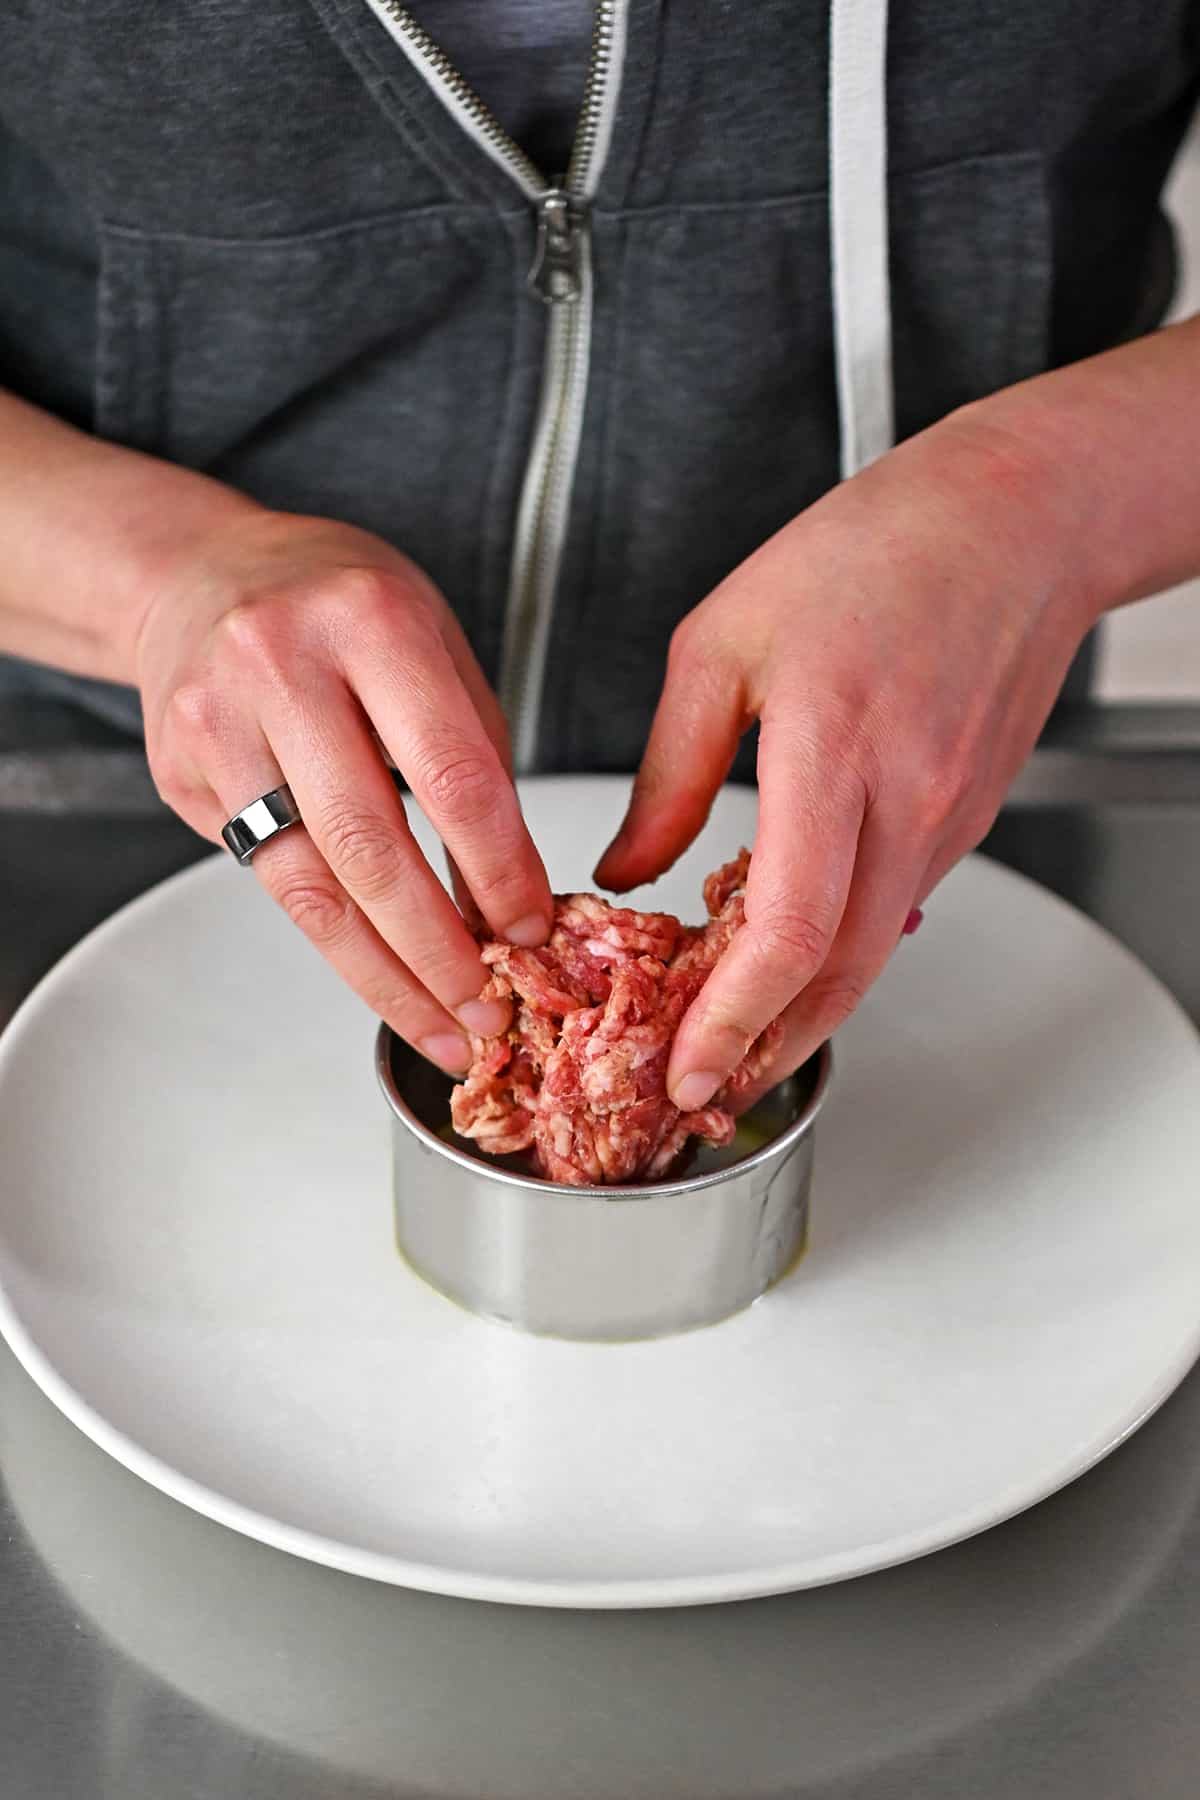 Two hands are adding raw bulk sausage into a round metal biscuit cutter on a white plate.